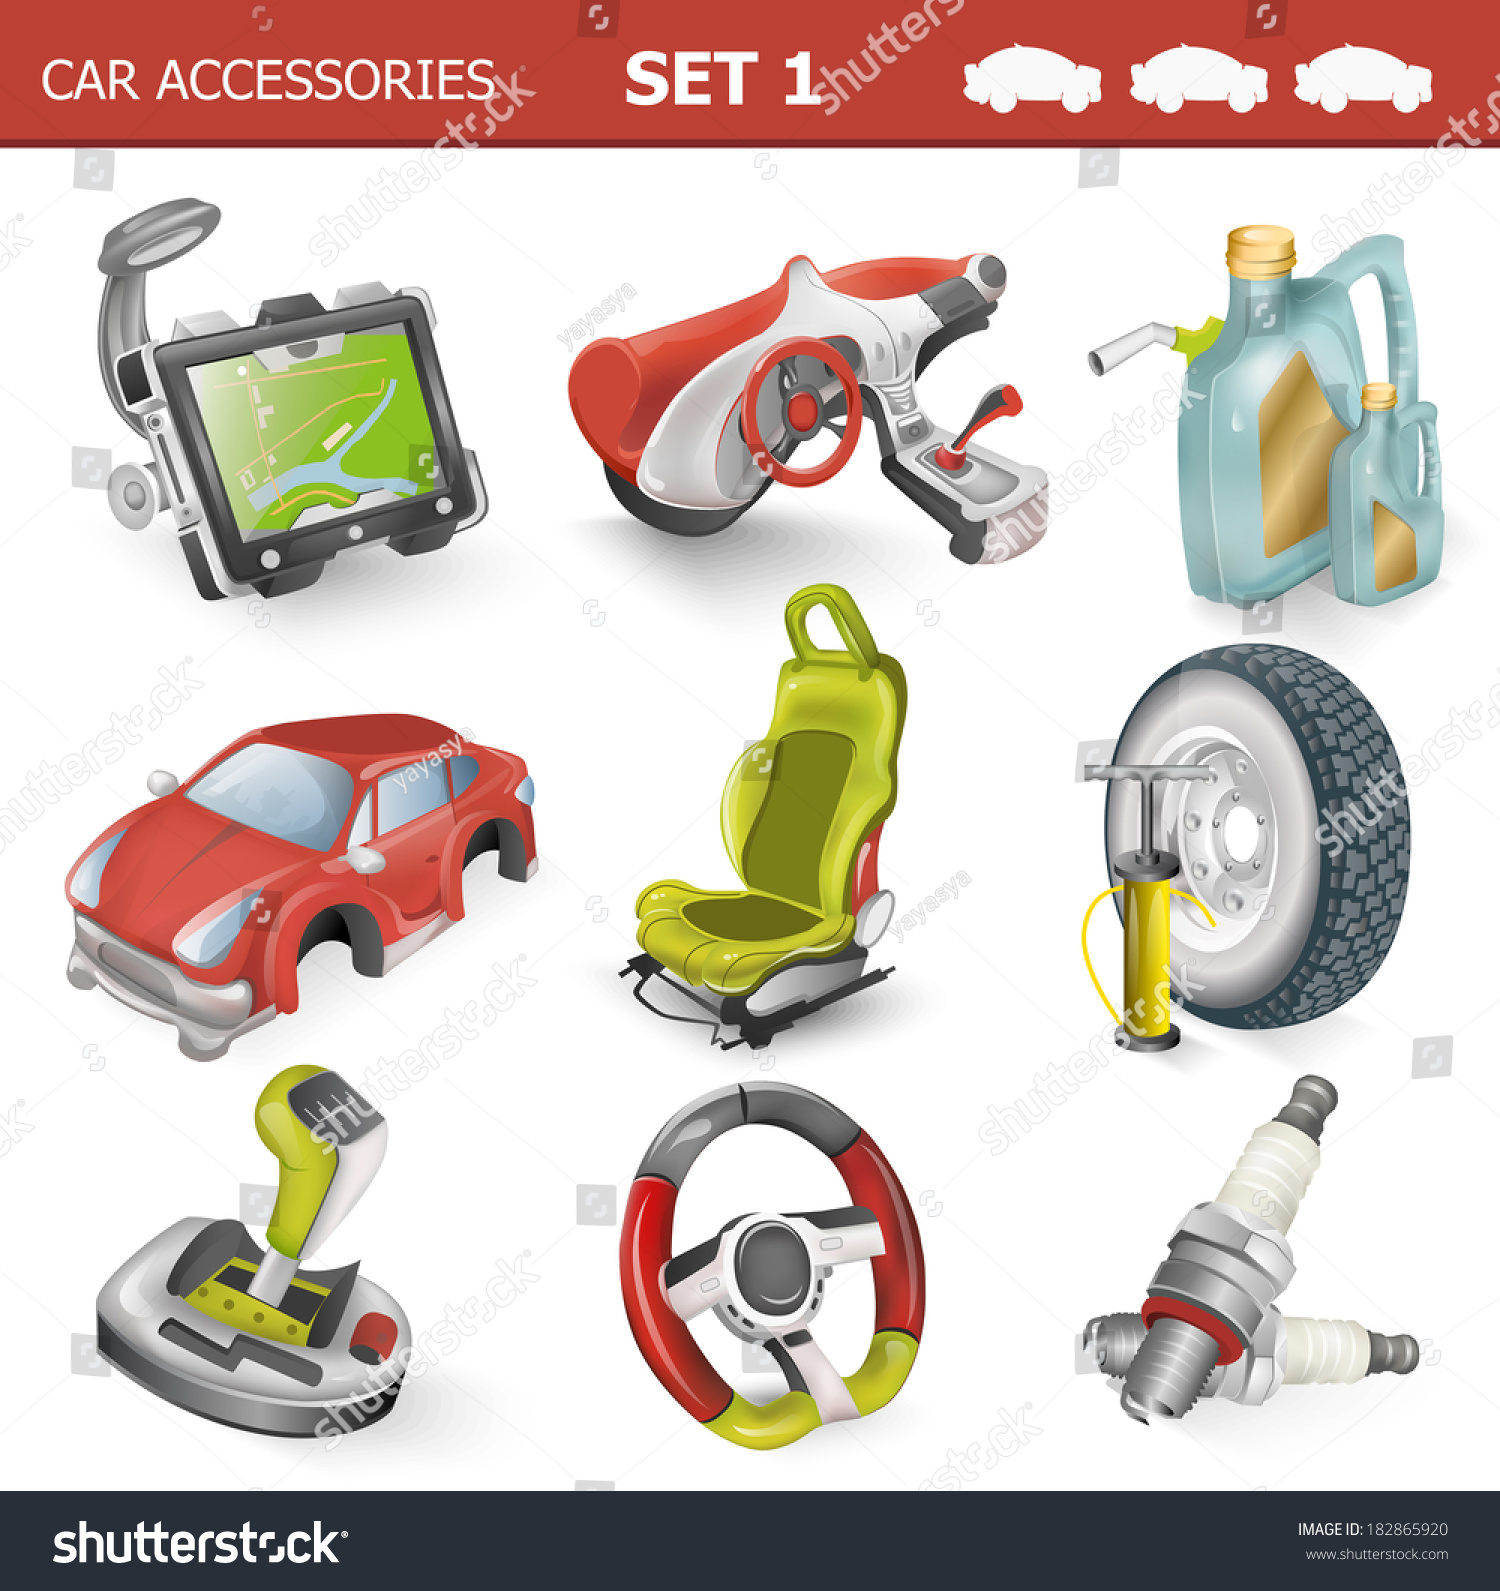 SVG of Car accessories                                svg